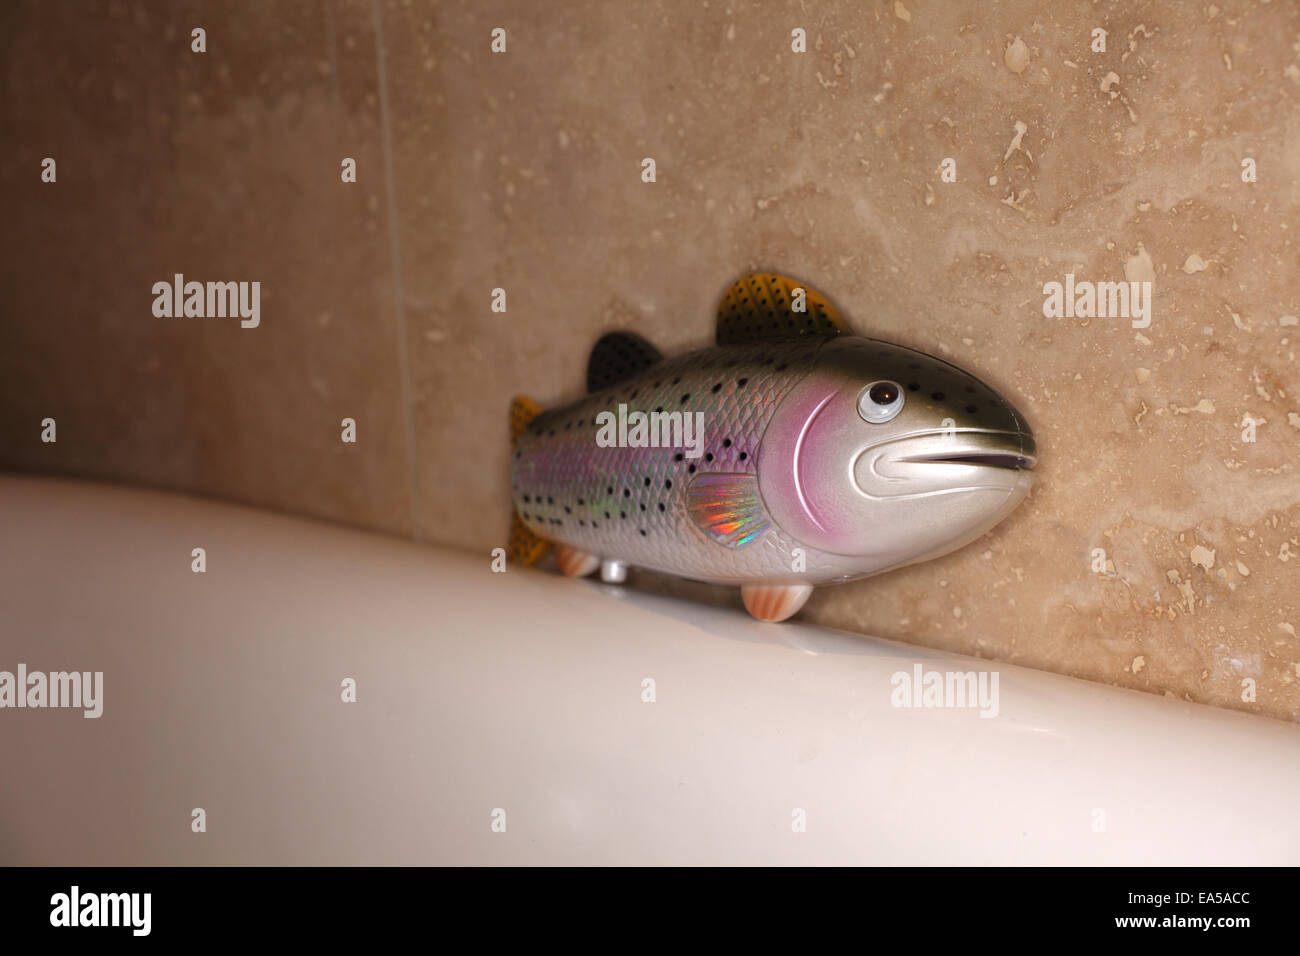 Fish Toy on the side of a bath Stock Photo